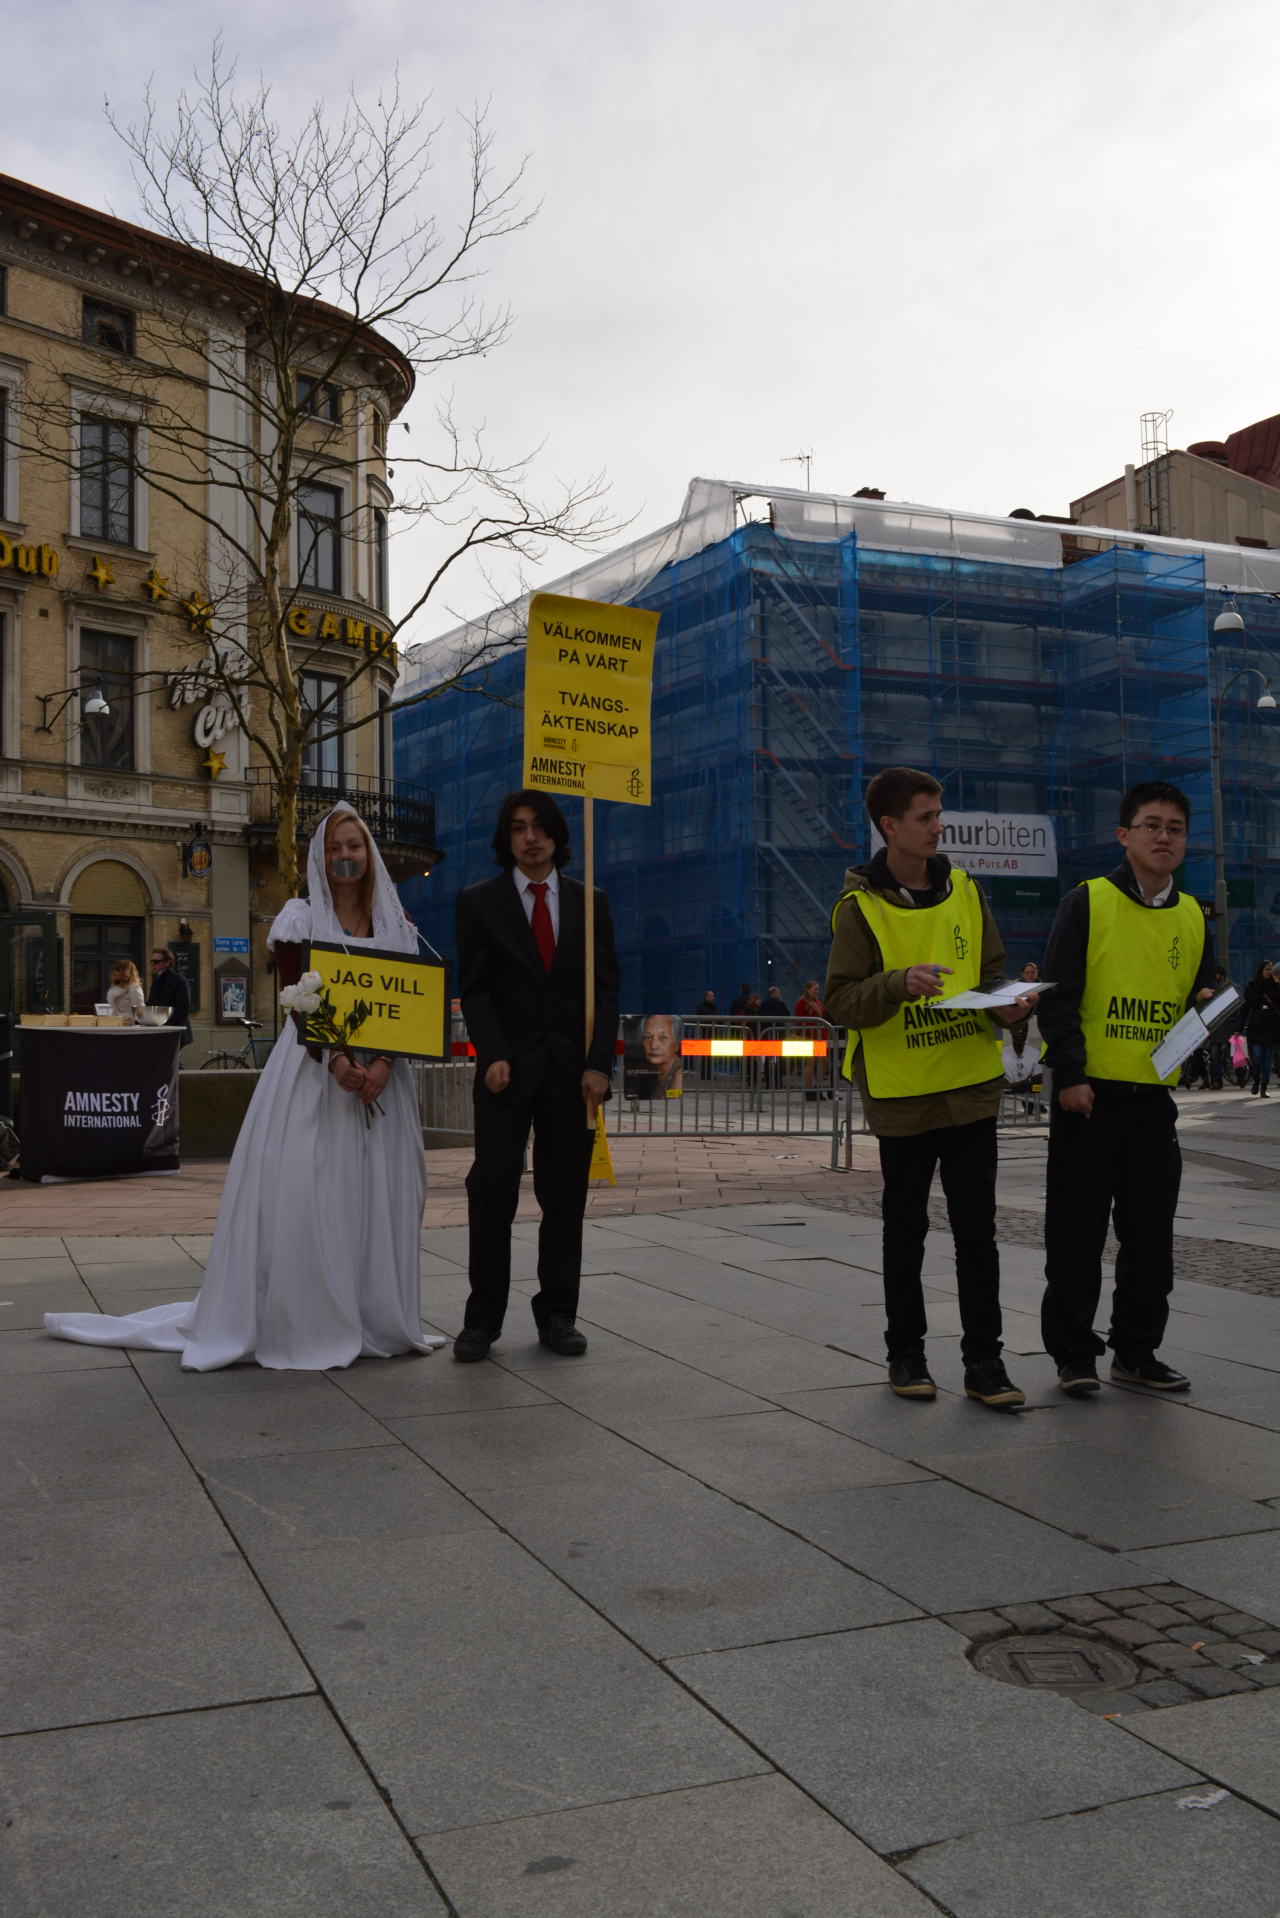 Youths displaying forced marriage, 8 march 2014, Sweden.